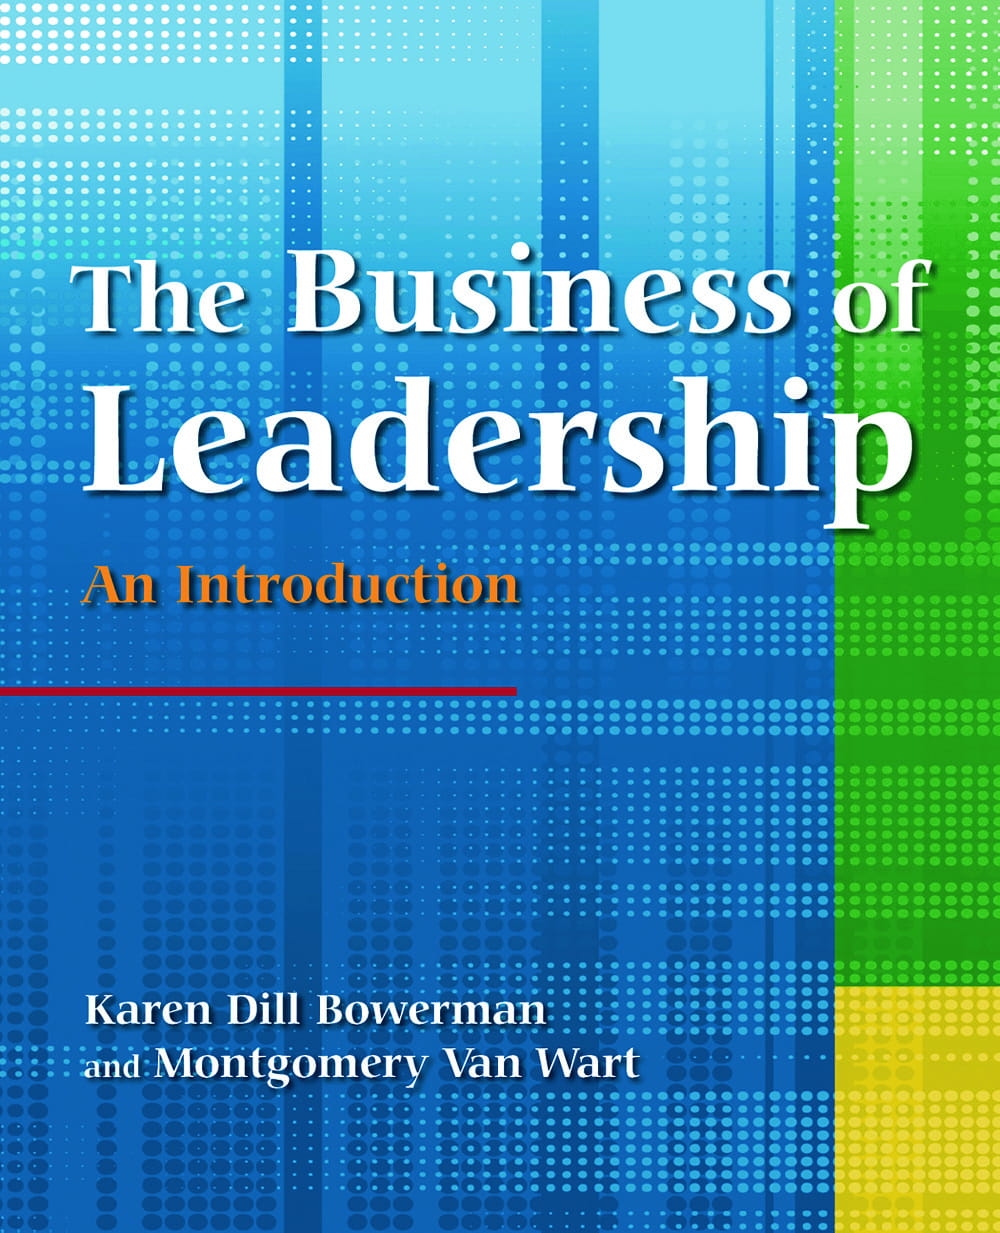 The Business of Leadership: An Introduction: An Introduction